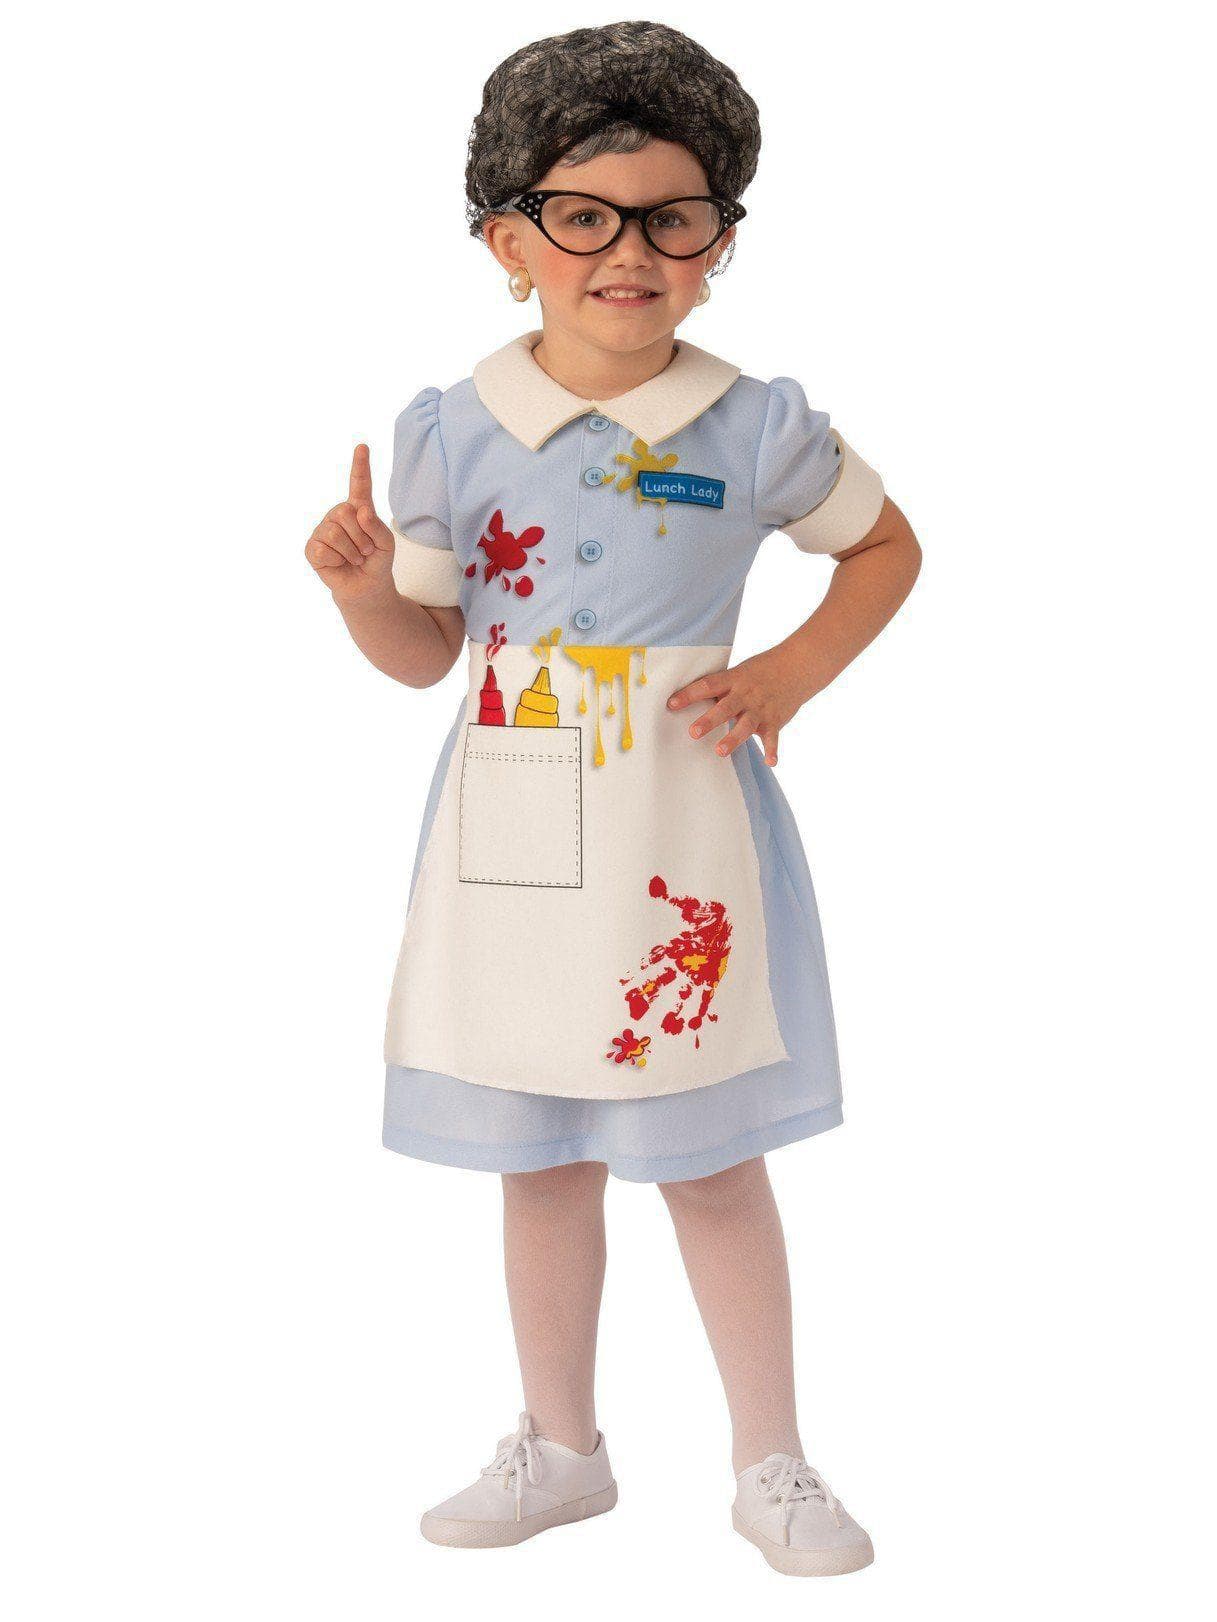 Kids Lunch Lady Costume - costumes.com